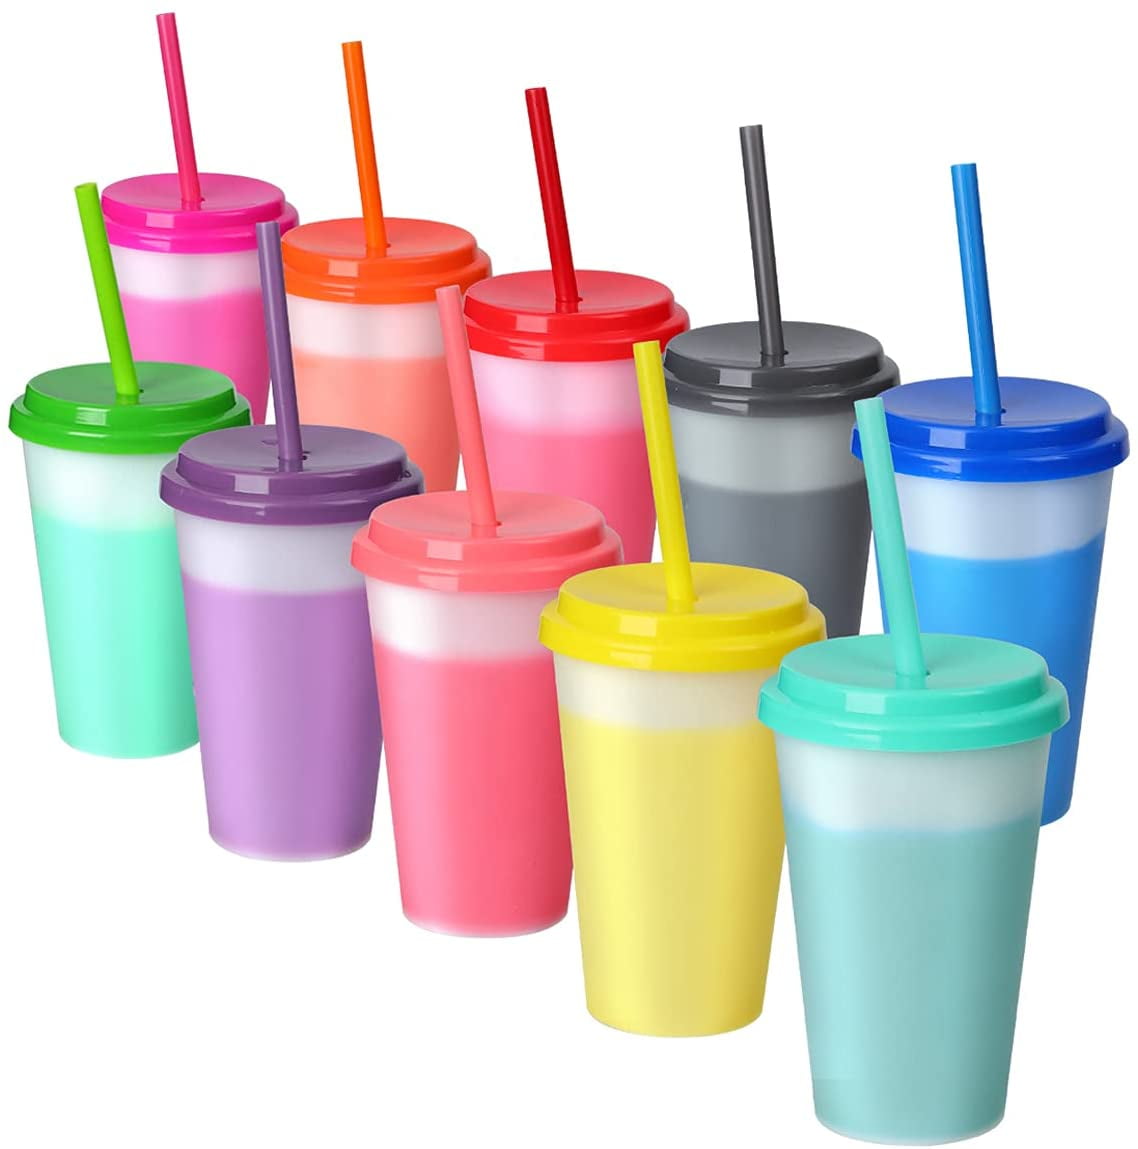 LEIFEOSH Plastic Tumblers with Lids and Straws, 24 Pcs Reusable Cups with Lids Plastic Colorful Cups for Parties Birthdays, Iced Coffee Cup Travel Mug